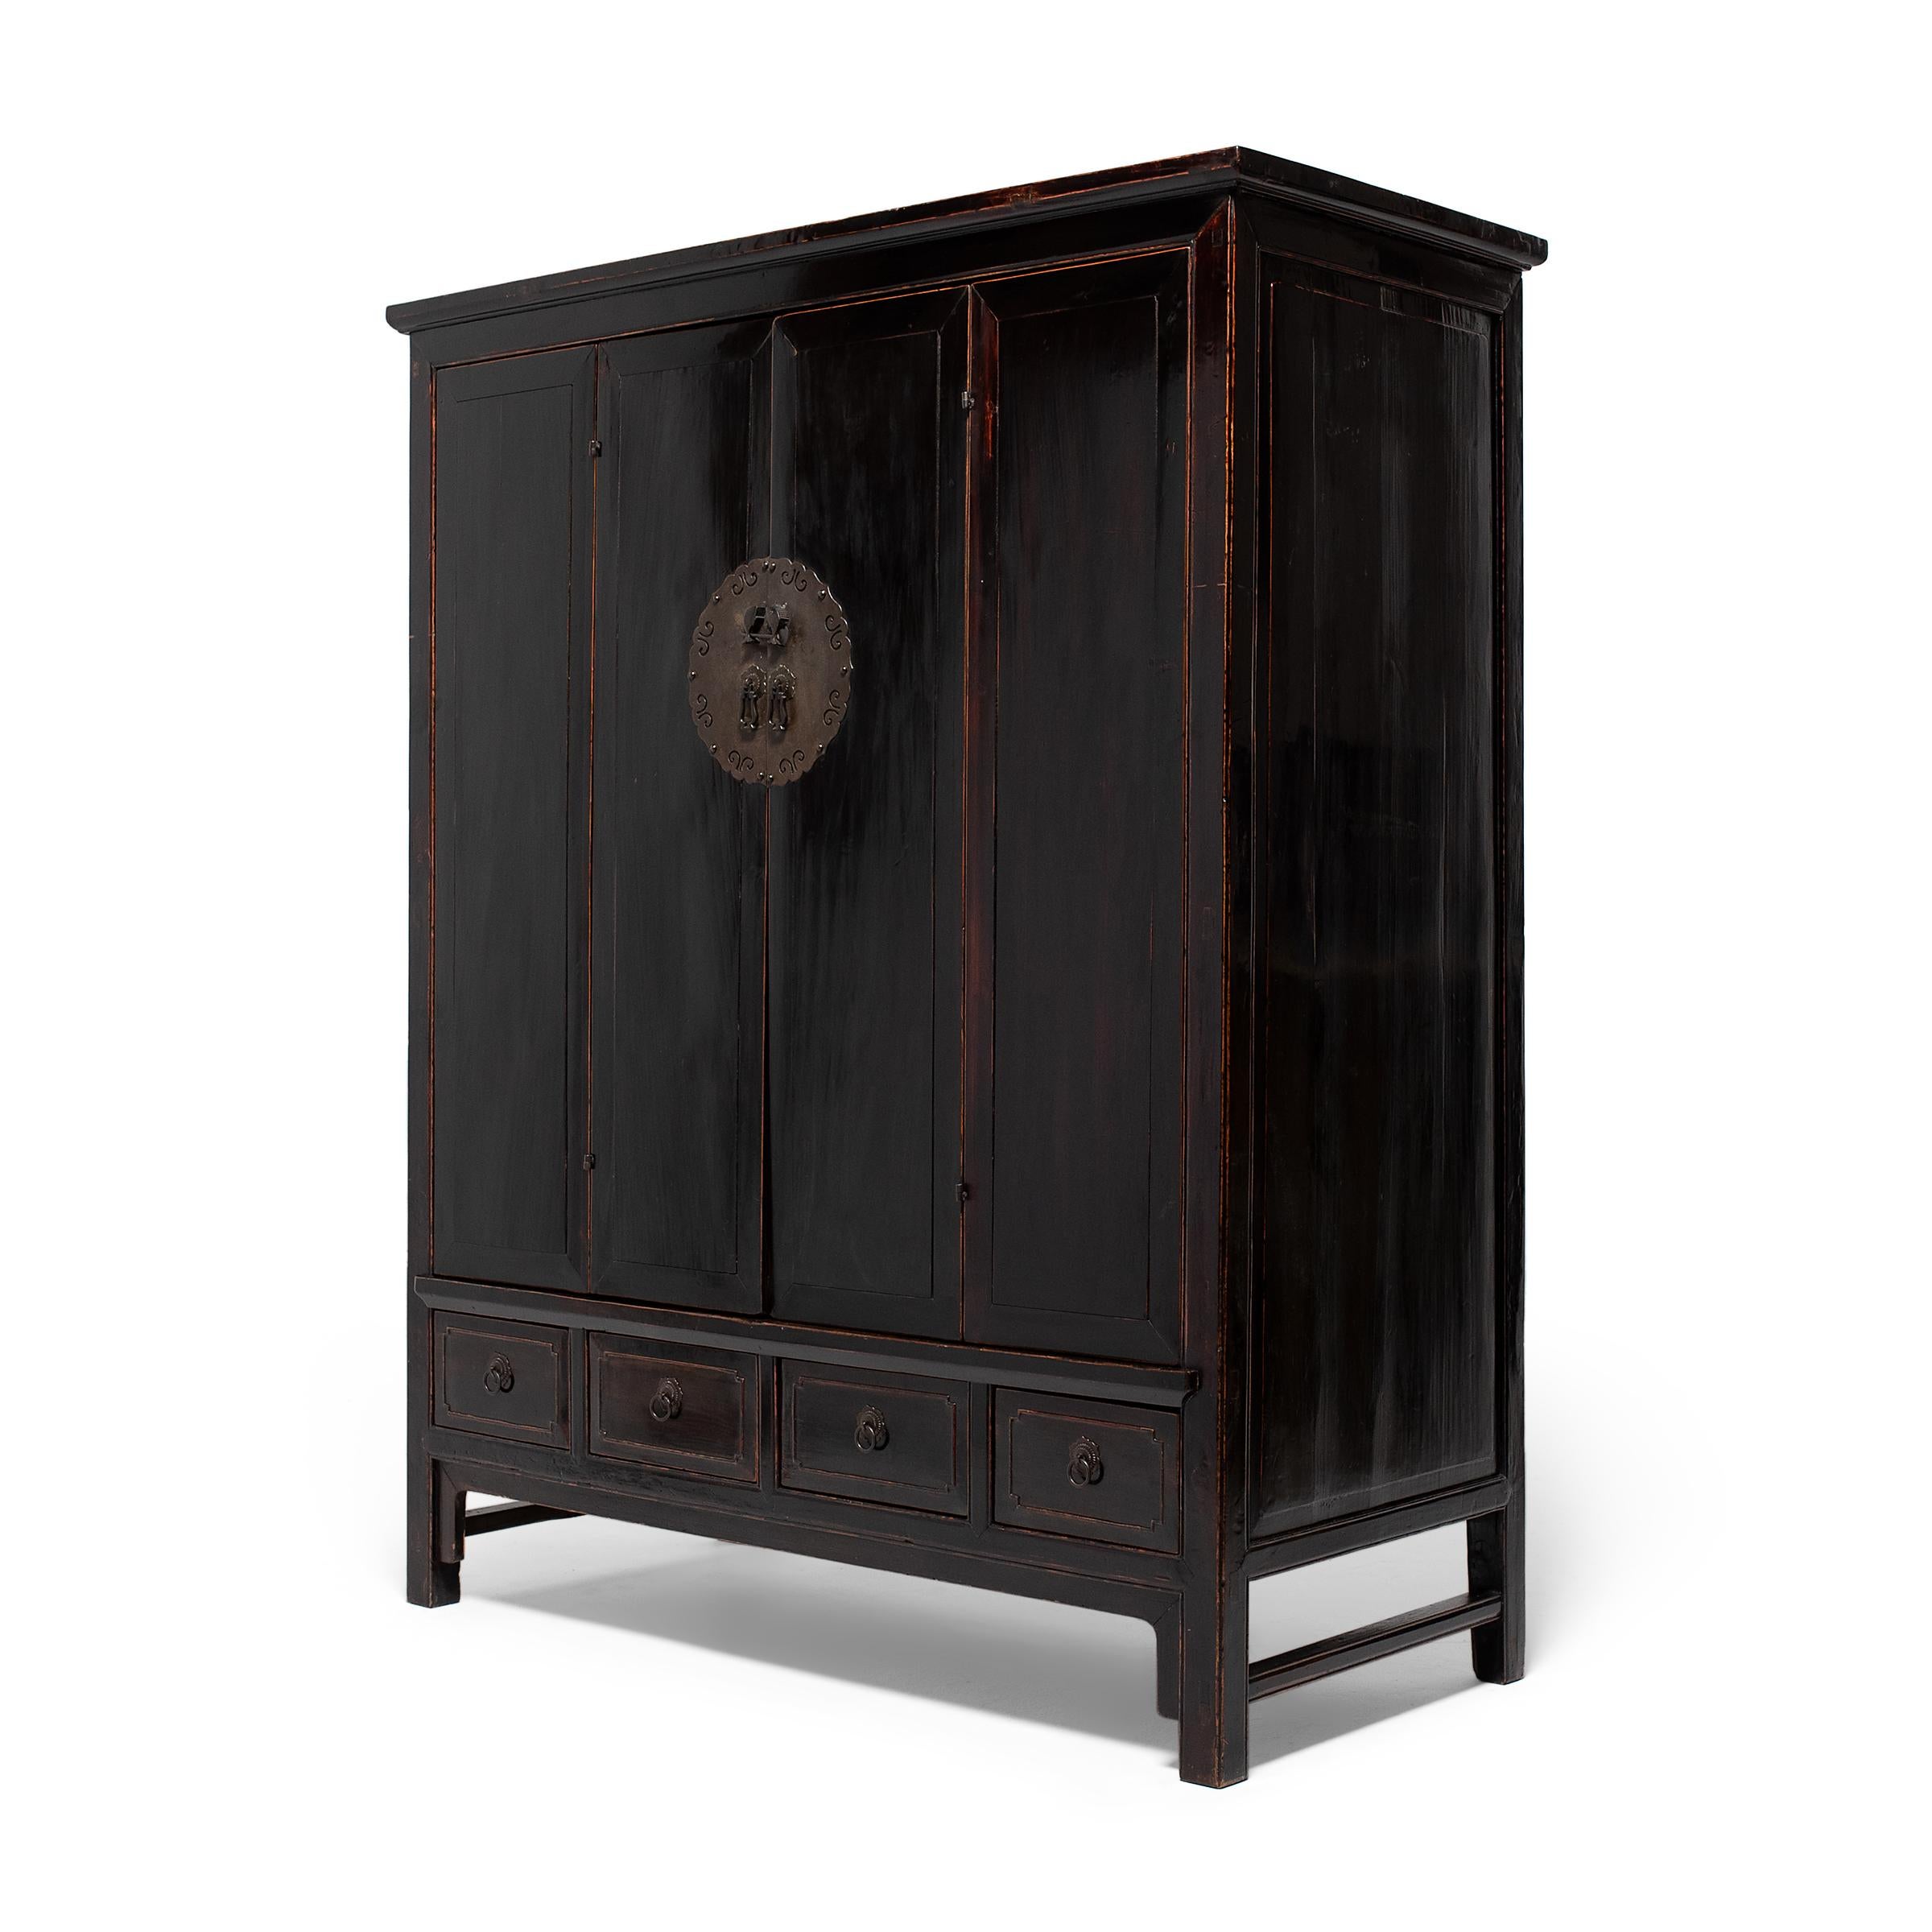 Lacquered Chinese Black Lacquer Double Fish Cabinet, c. 1850